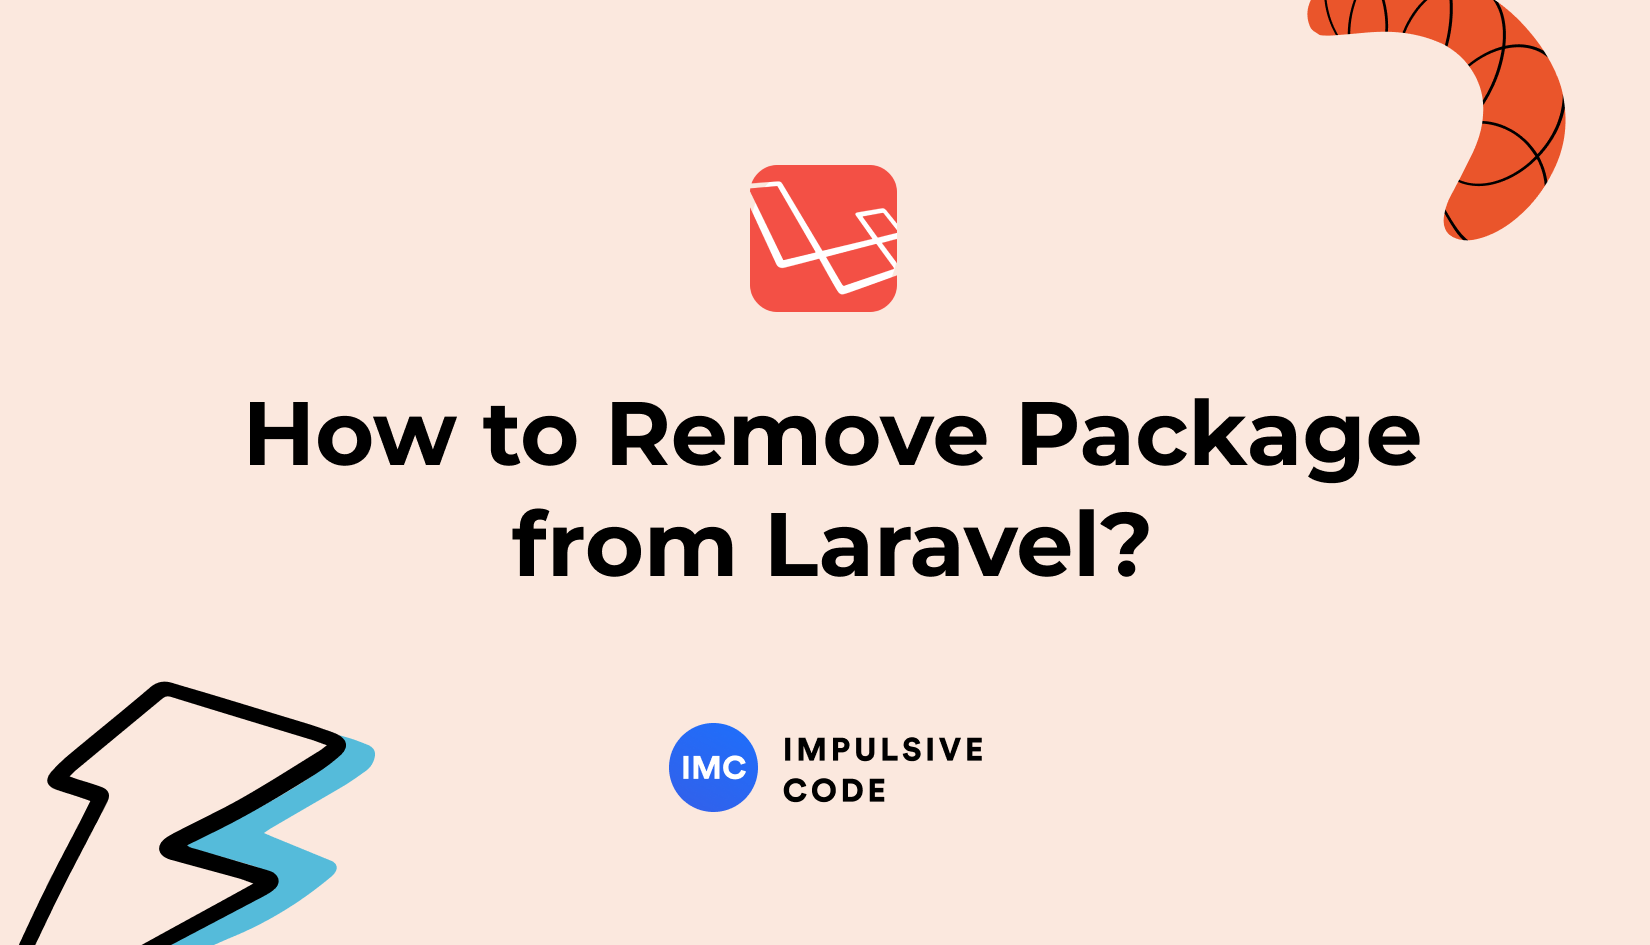 How to Remove Package from Laravel?